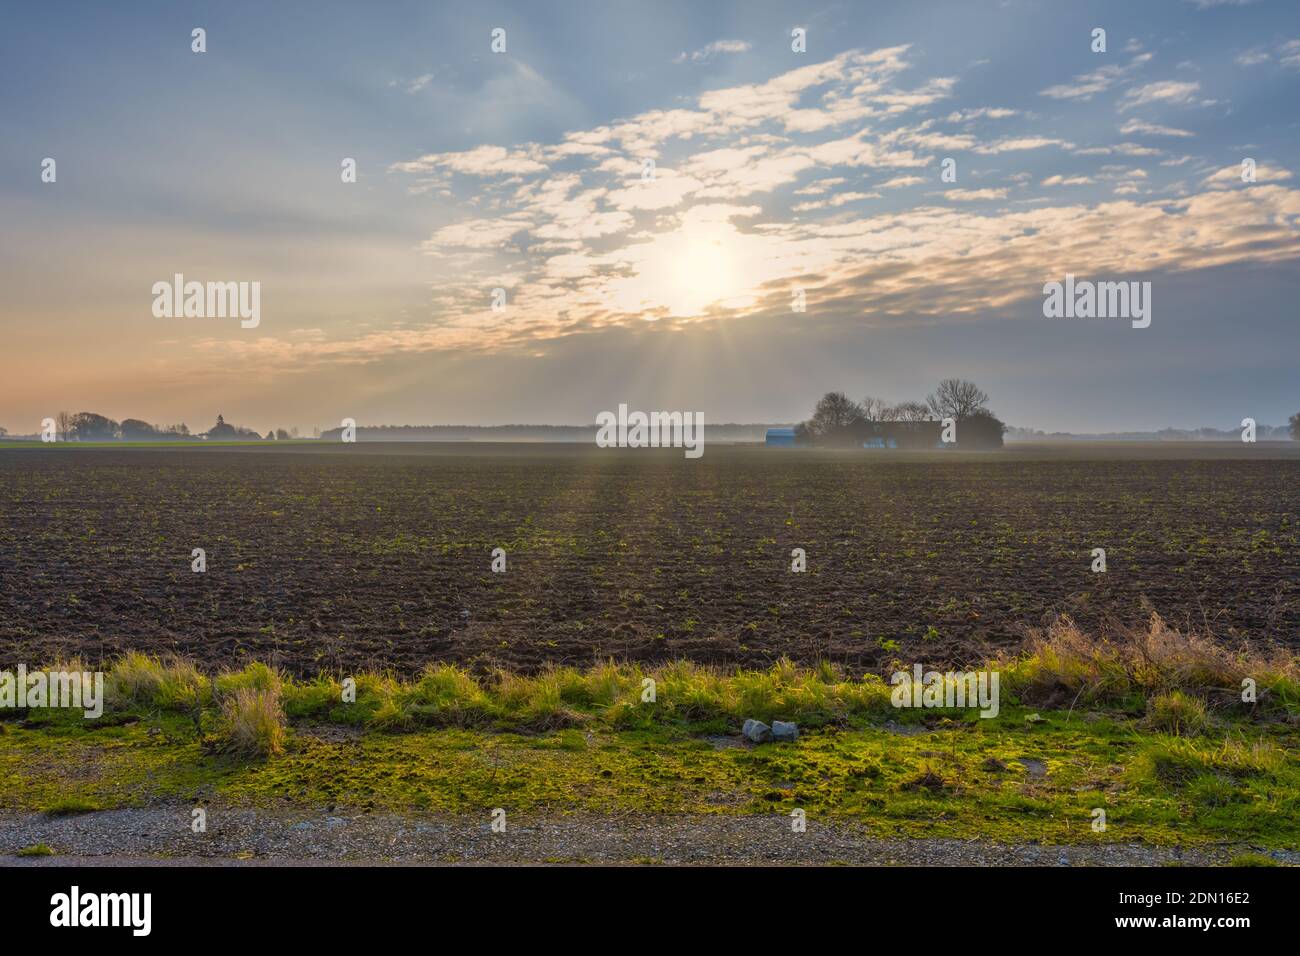 A backlit photo of a green and a newly plowed field. Picture from Scania county, southern Sweden Stock Photo